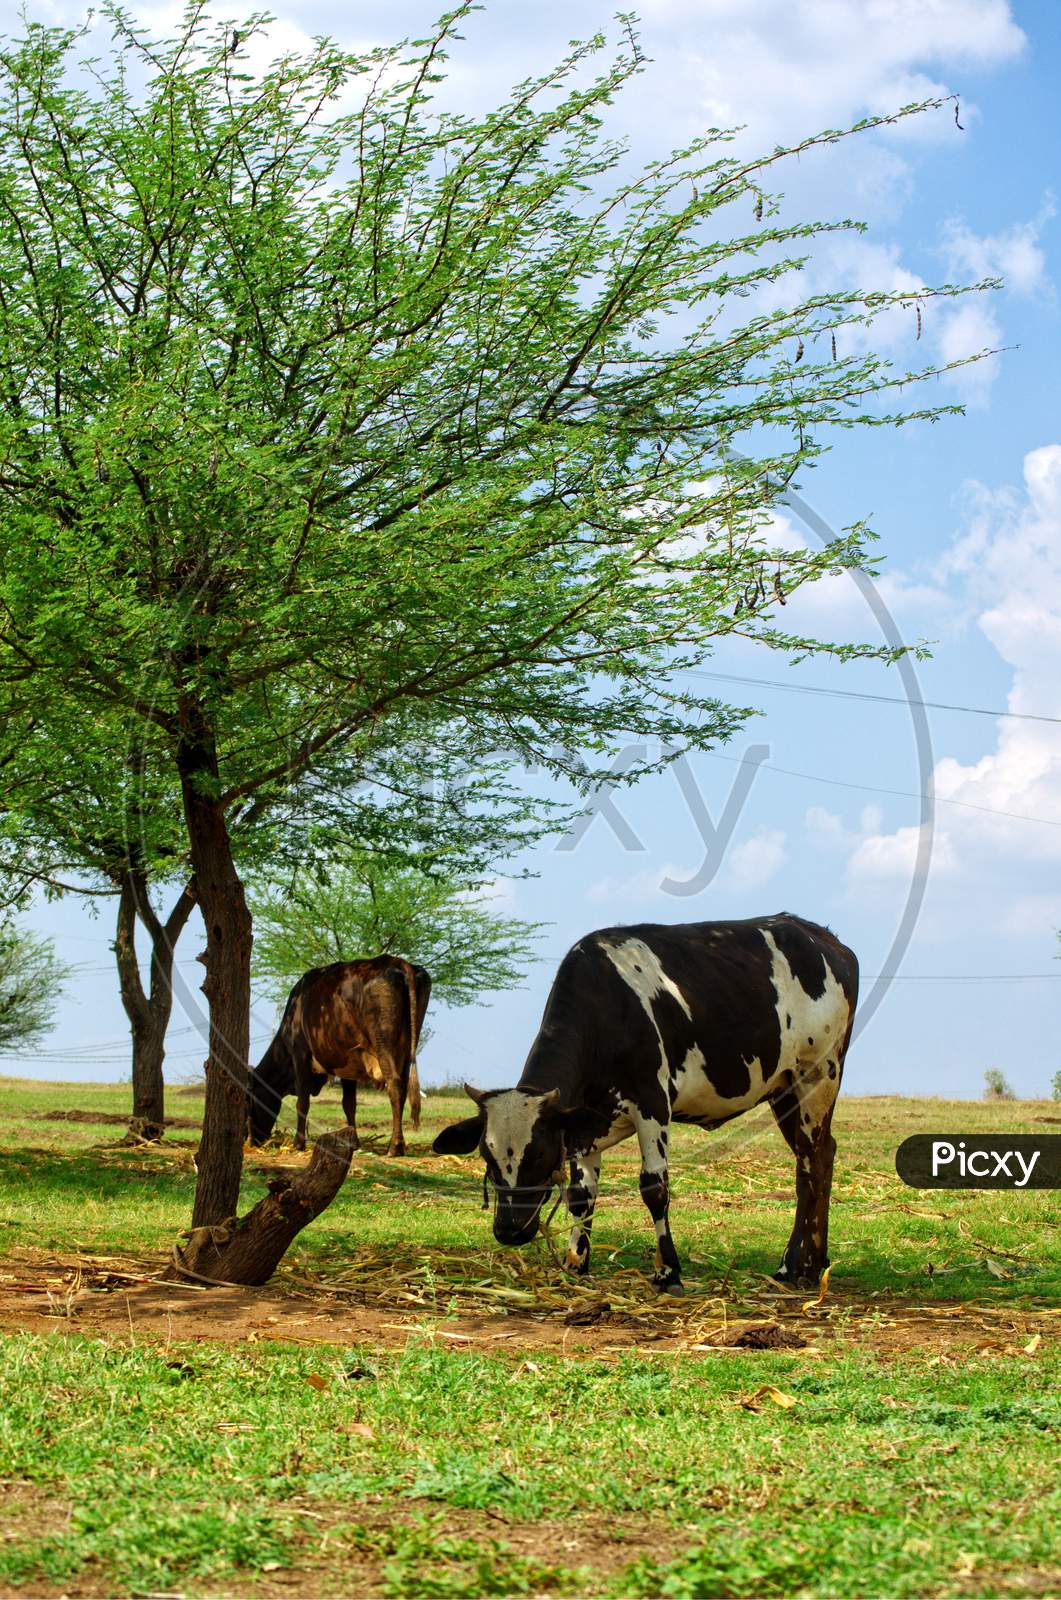 A Cattle Is Eating Dry Grass Below Tree And Clouds